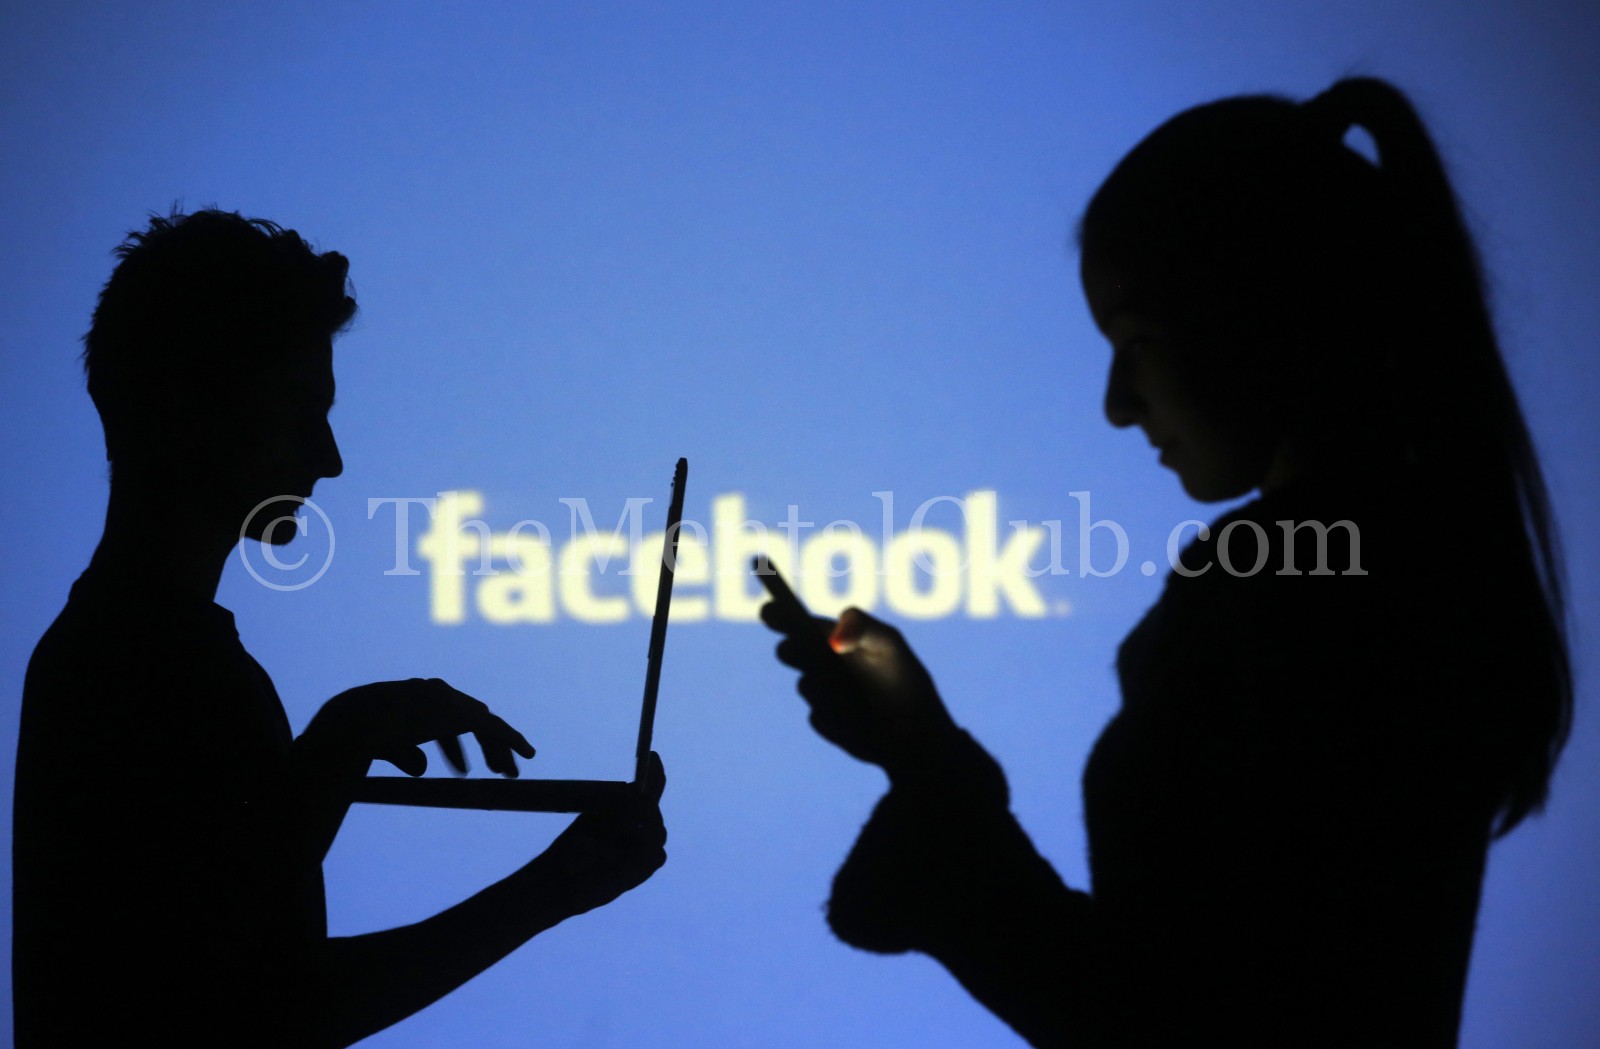 How much does your Facebook account earn